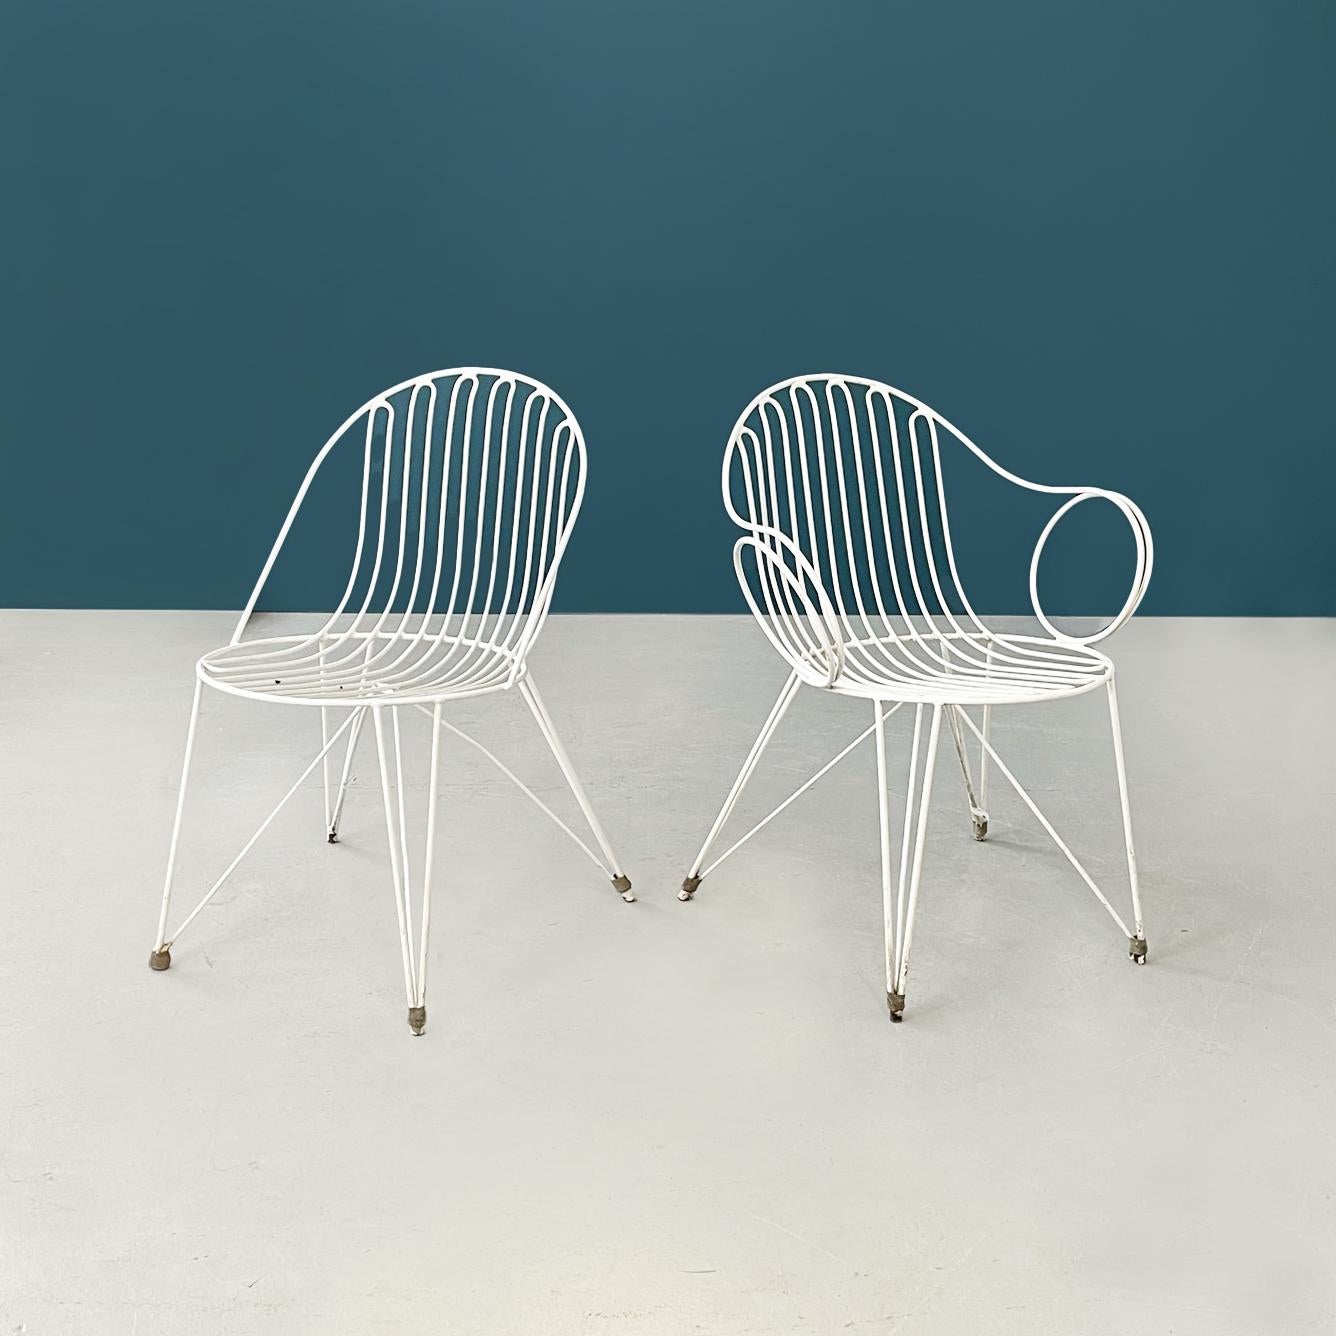 German mid-century white iron garden chairs by Mauser Werke Waldeck, 1950s
Set of 5 garden chairs with structure in curved solid iron rod, white enamelled. Two chairs have curly armrests, the other 3 have no armrests. Suitable for outdoor use.